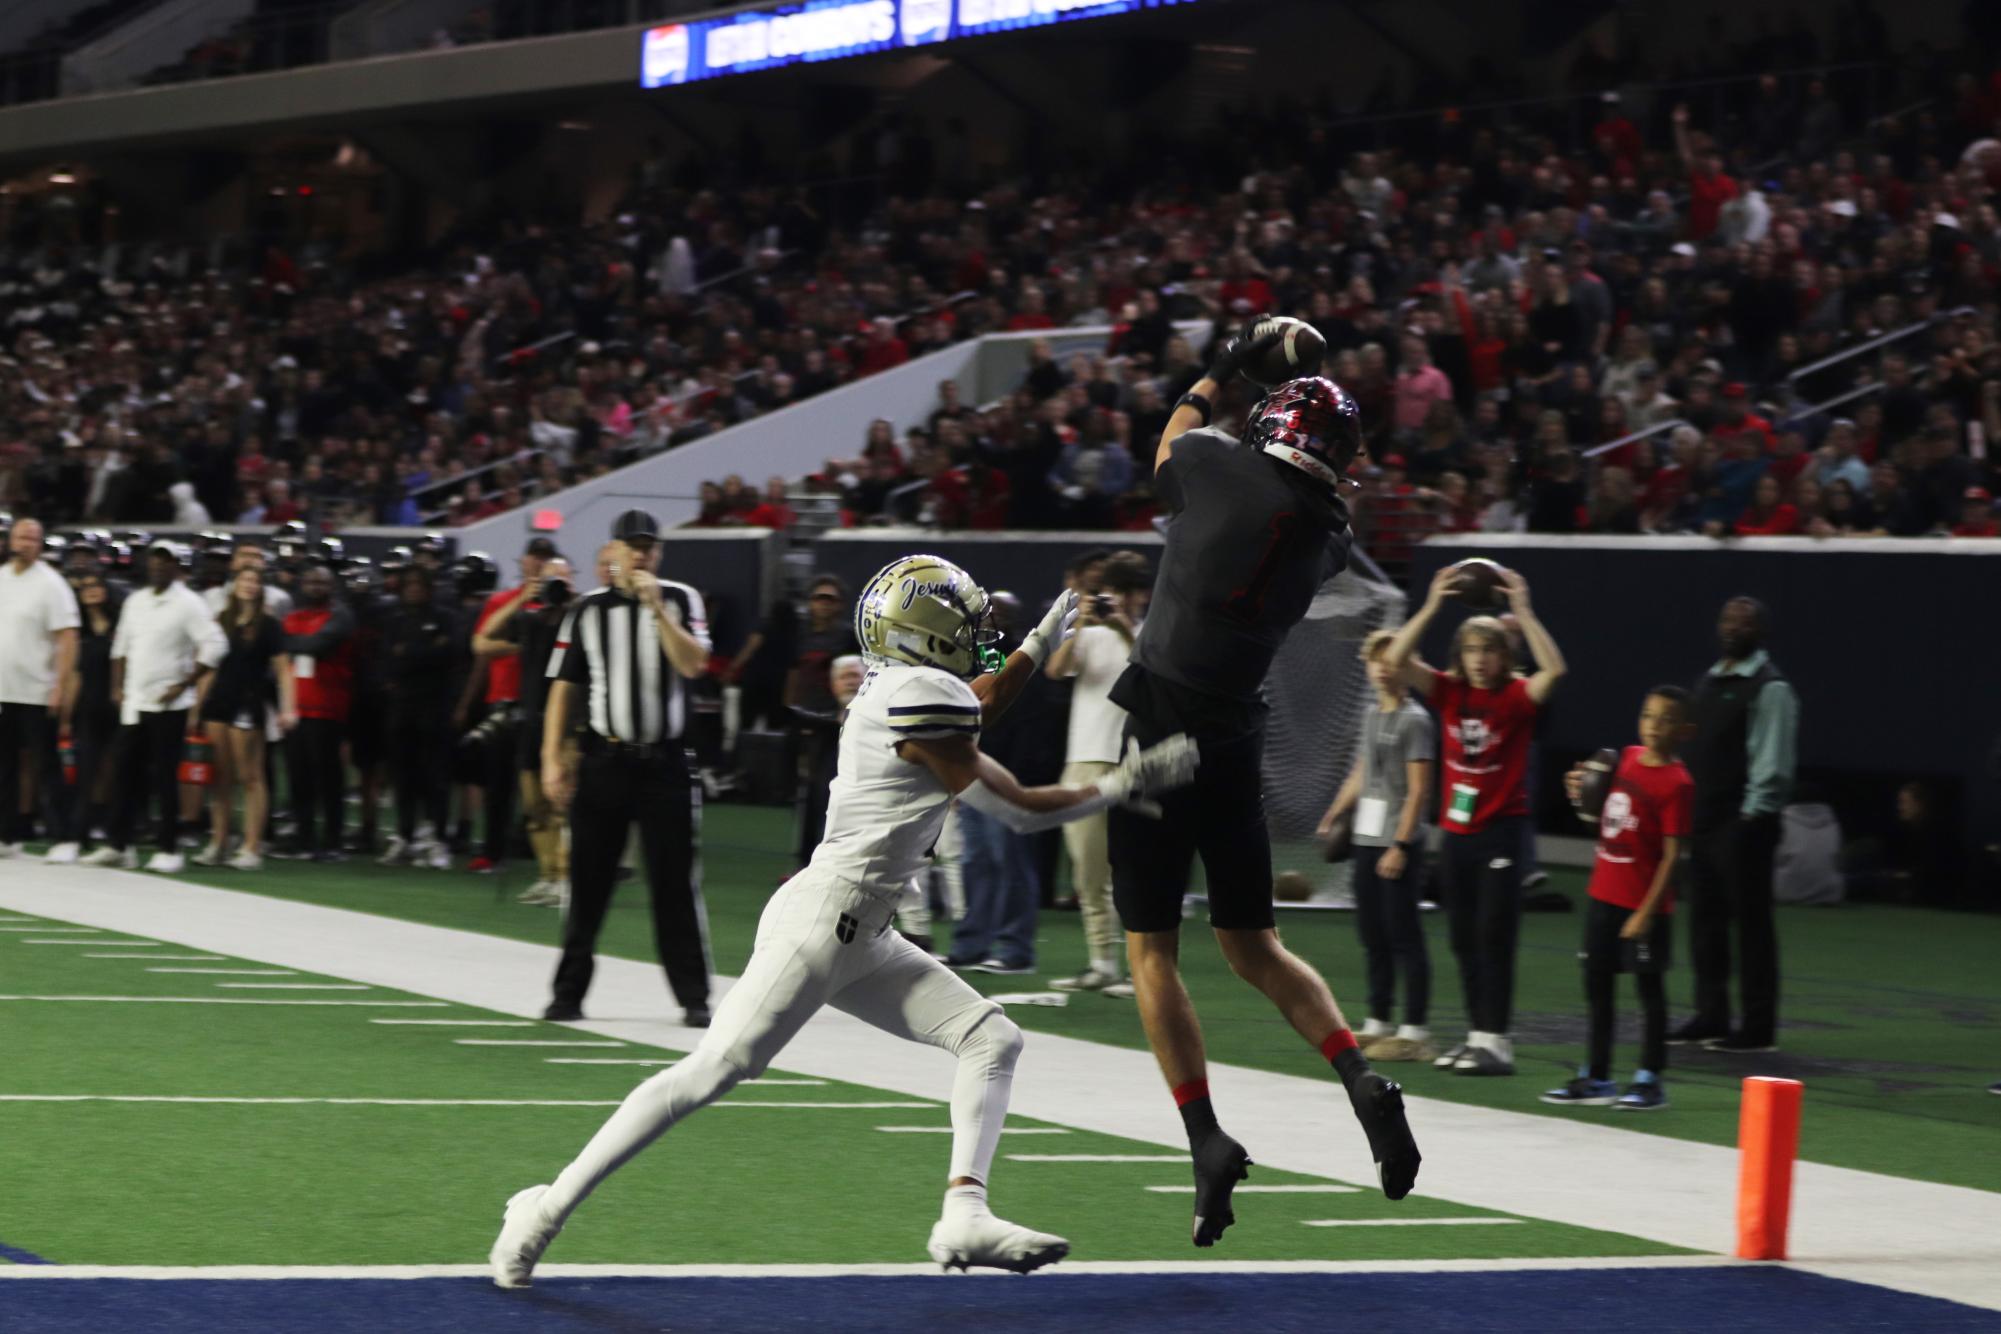 Senior wide receiver Baron Tipton brings in one of his three touchdown receptions on Thursday against Dallas Jesuit at Ford Center in Frisco. Coppell defeated Jesuit, 42-23, in the Division II Region I Area playoffs as a comeback effort in the third quarter fell short by Jesuit.